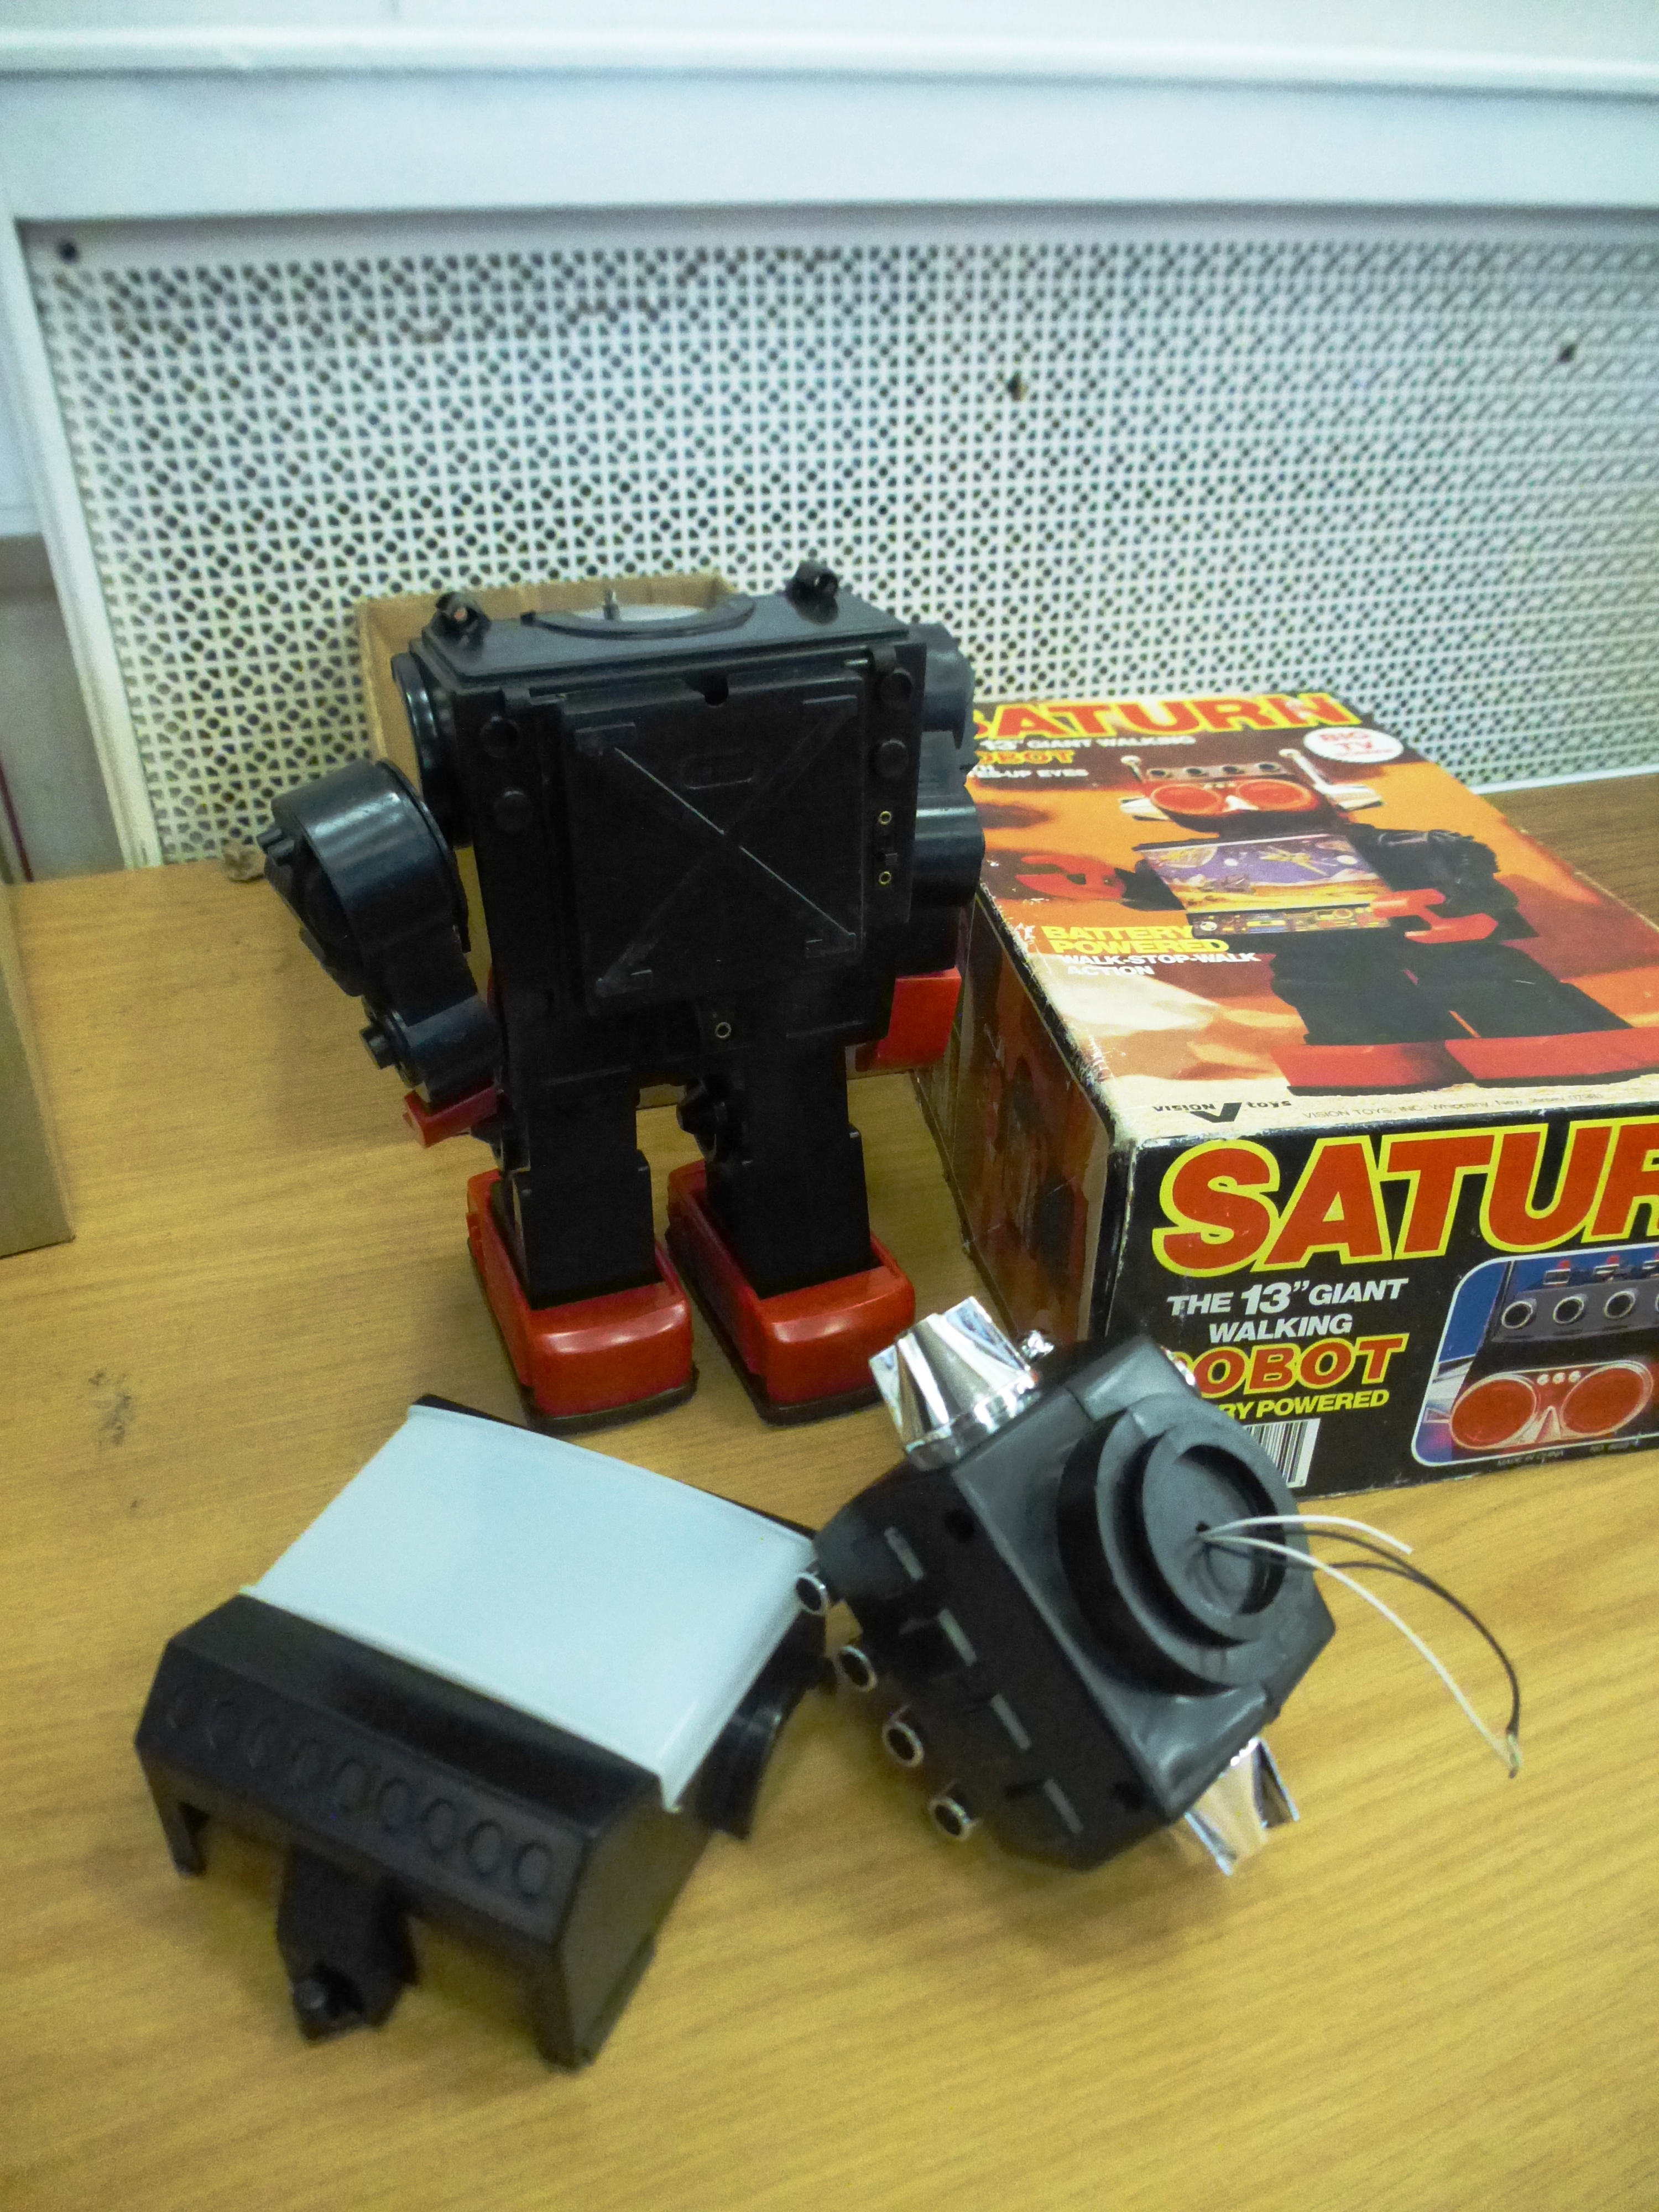 2 BOXED TV SCREEN ROBOTS - JUPITER AND SATURN (INCOMPLETE) - Image 5 of 7